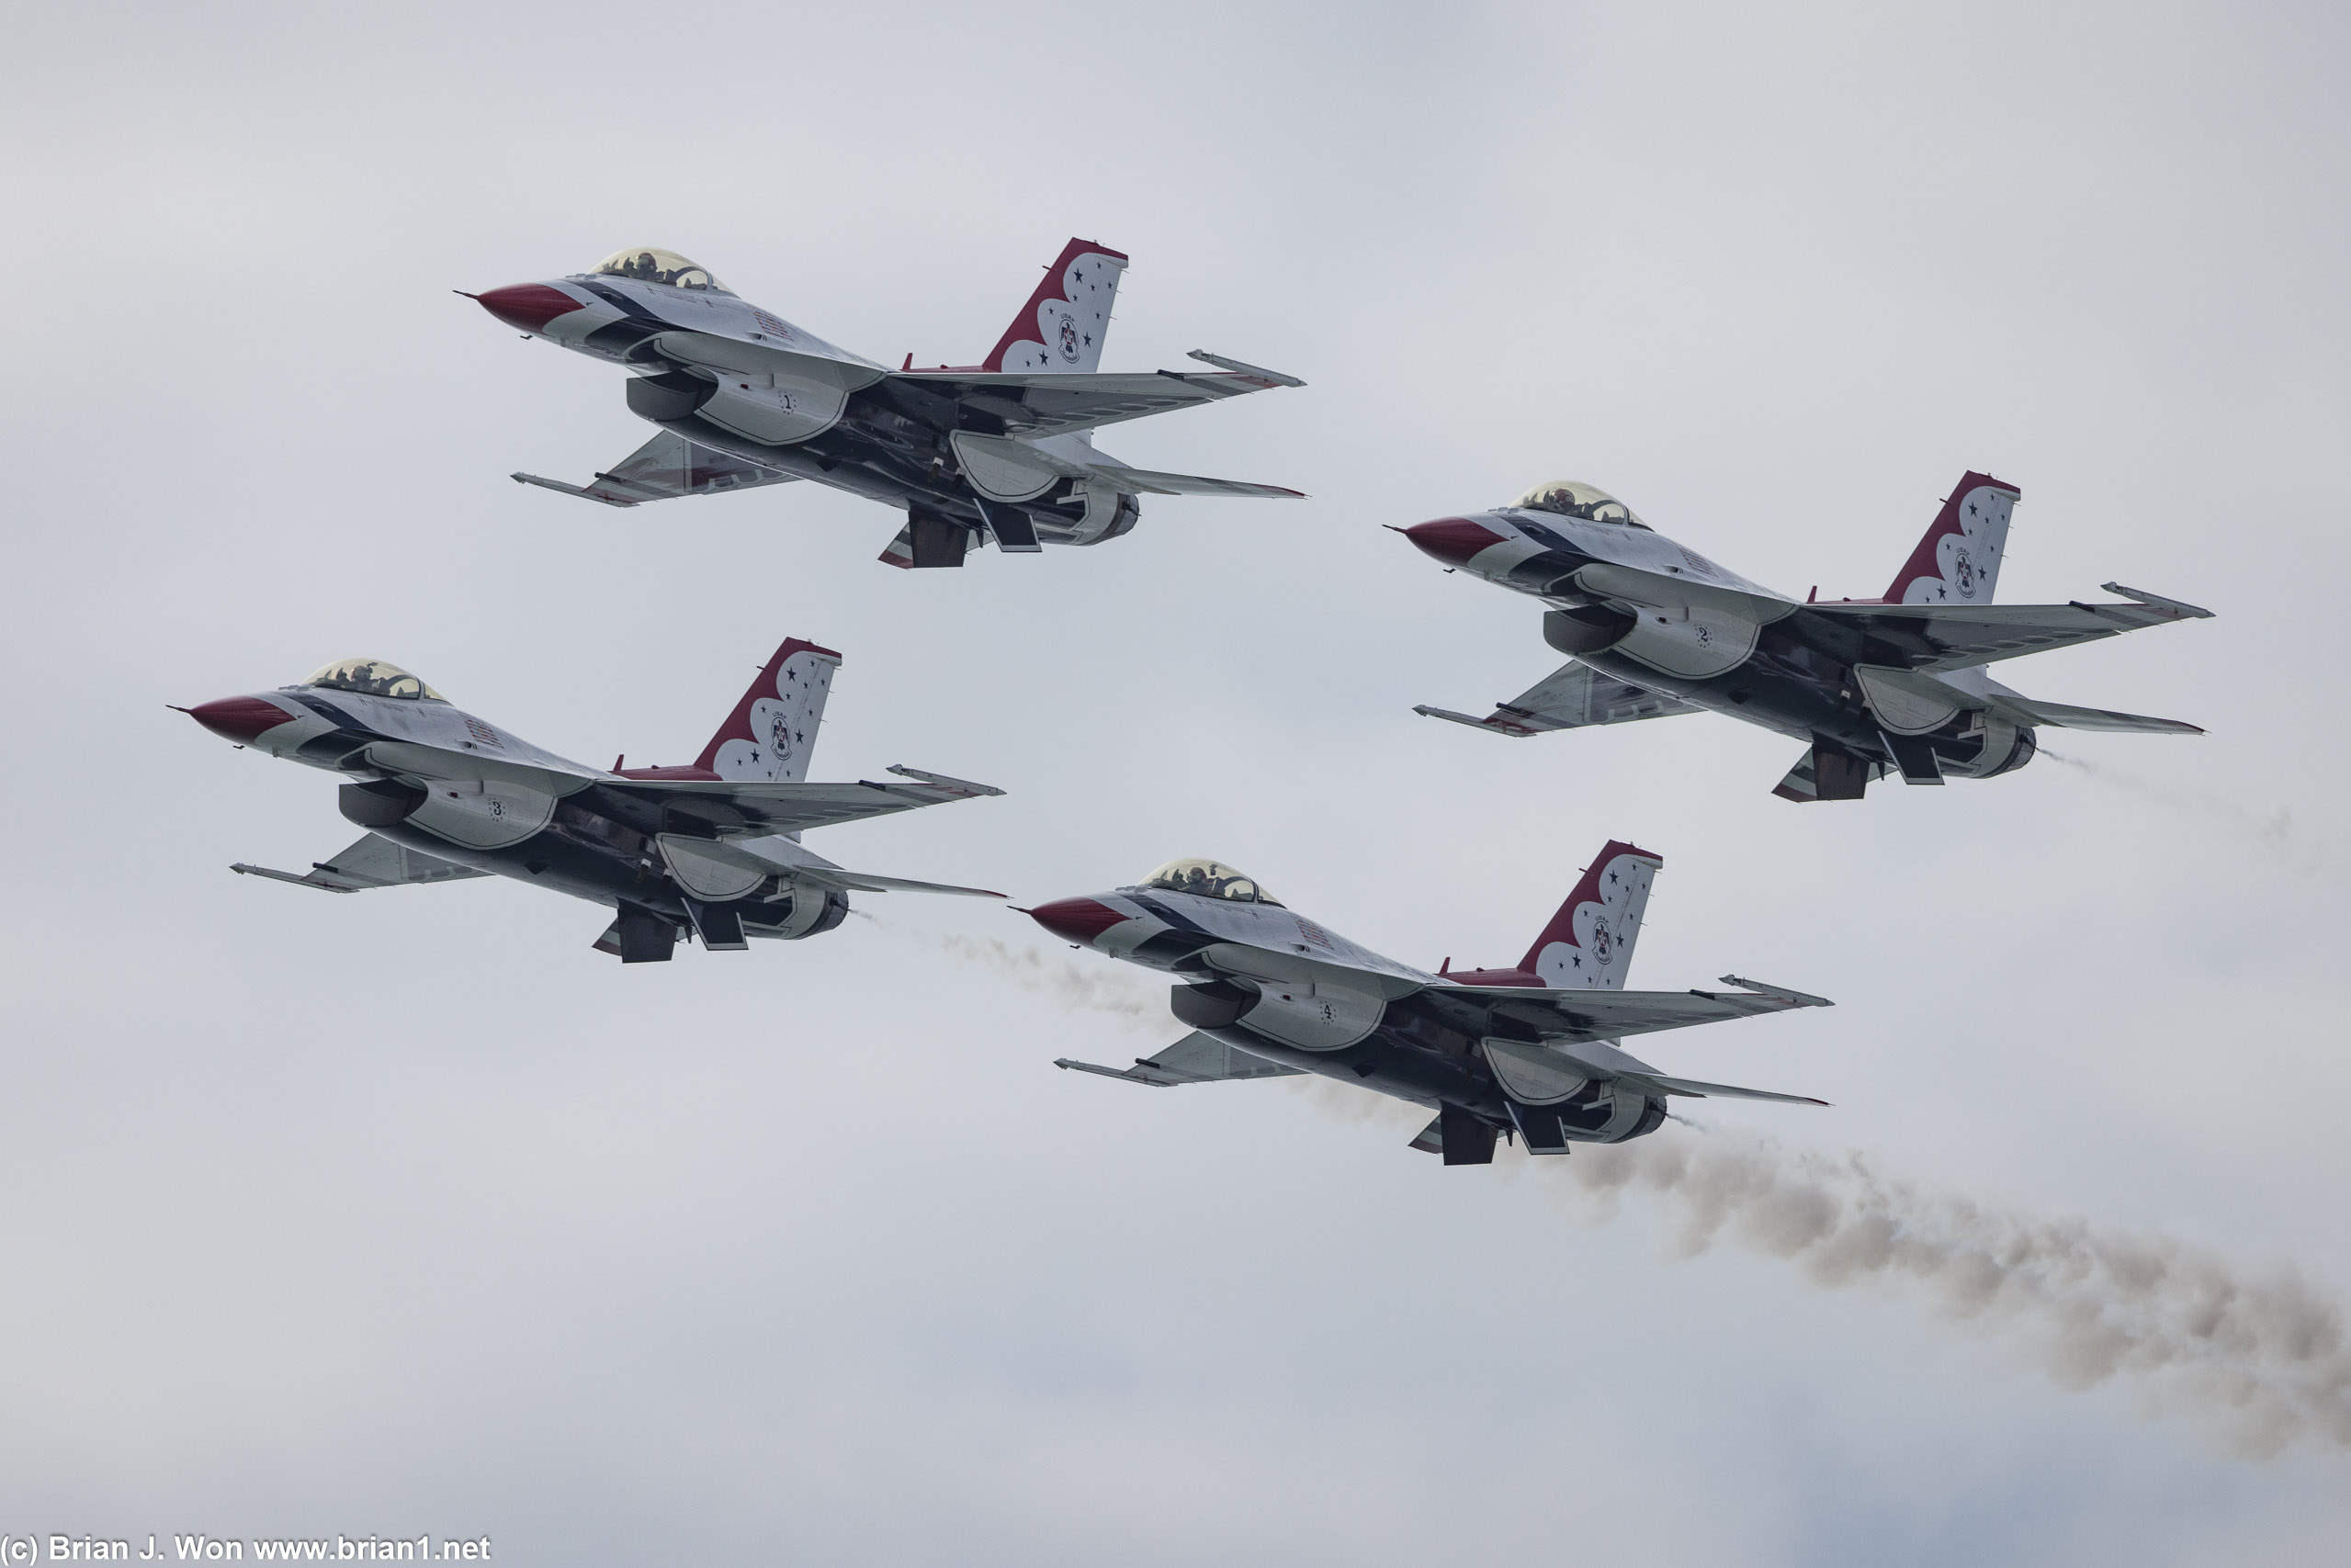 Time for the headline act, the USAF Thunderbirds.